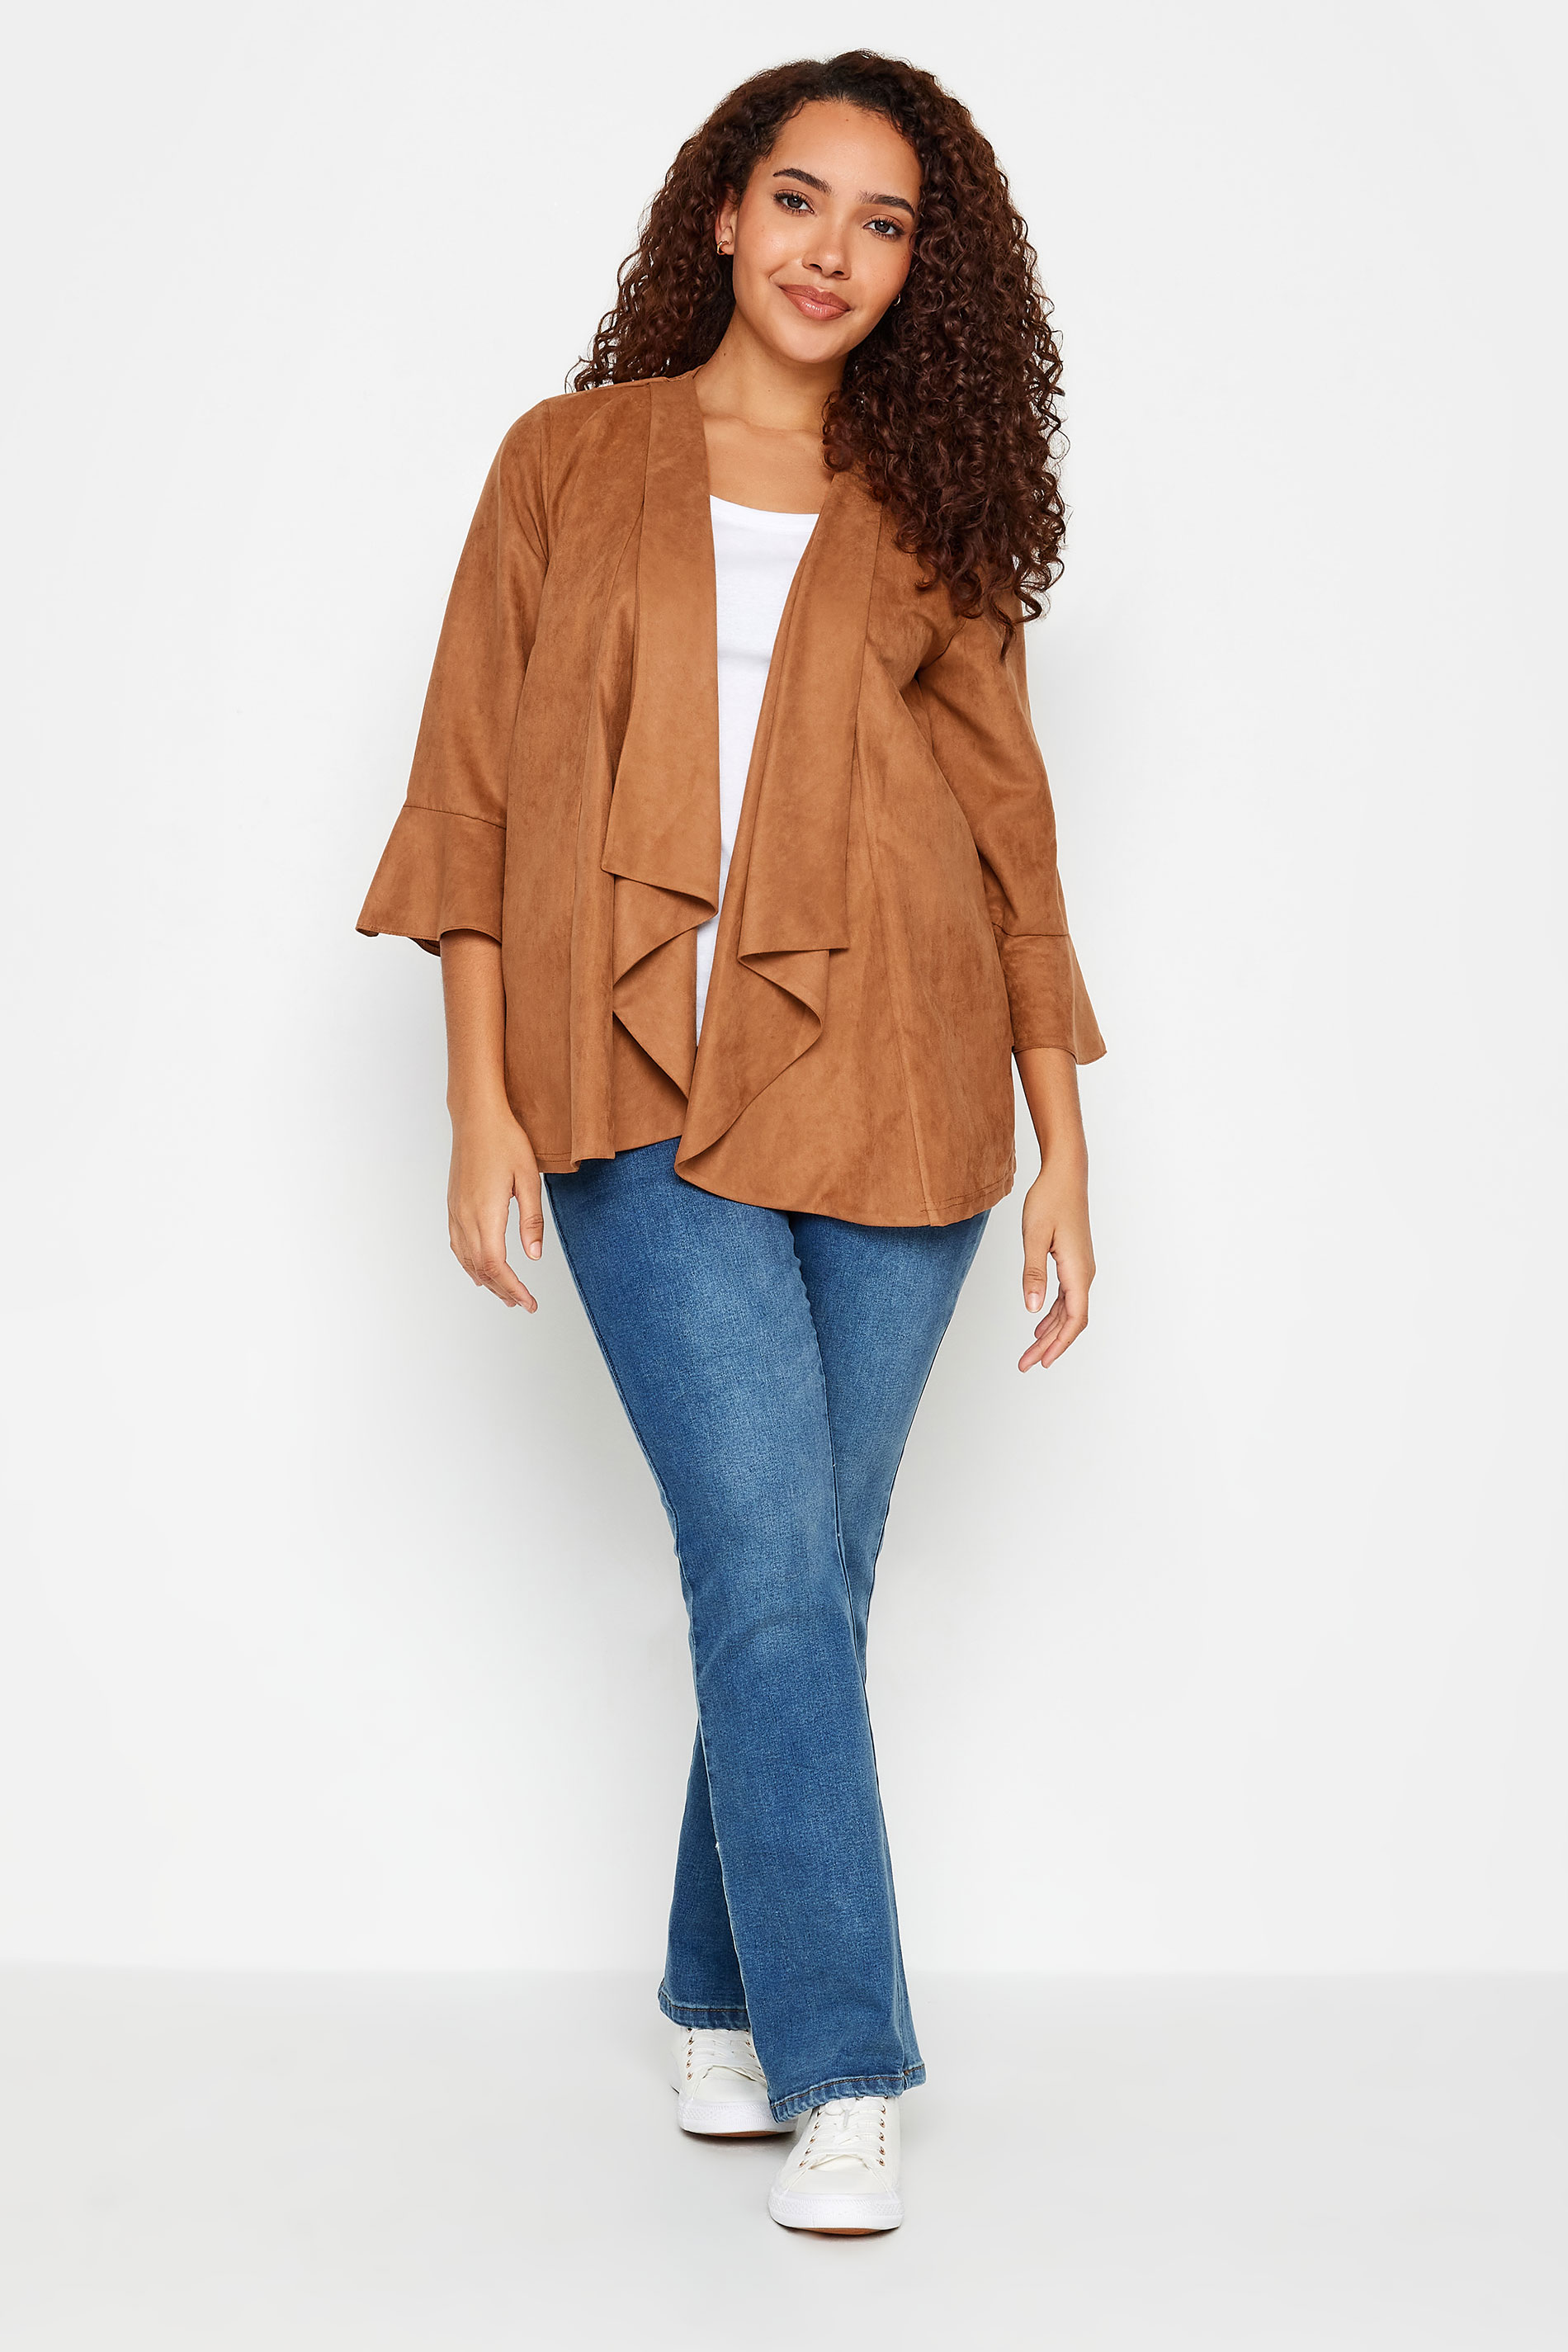 M&Co Tan Brown Suedette Waterfall Jacket | M&Co 2